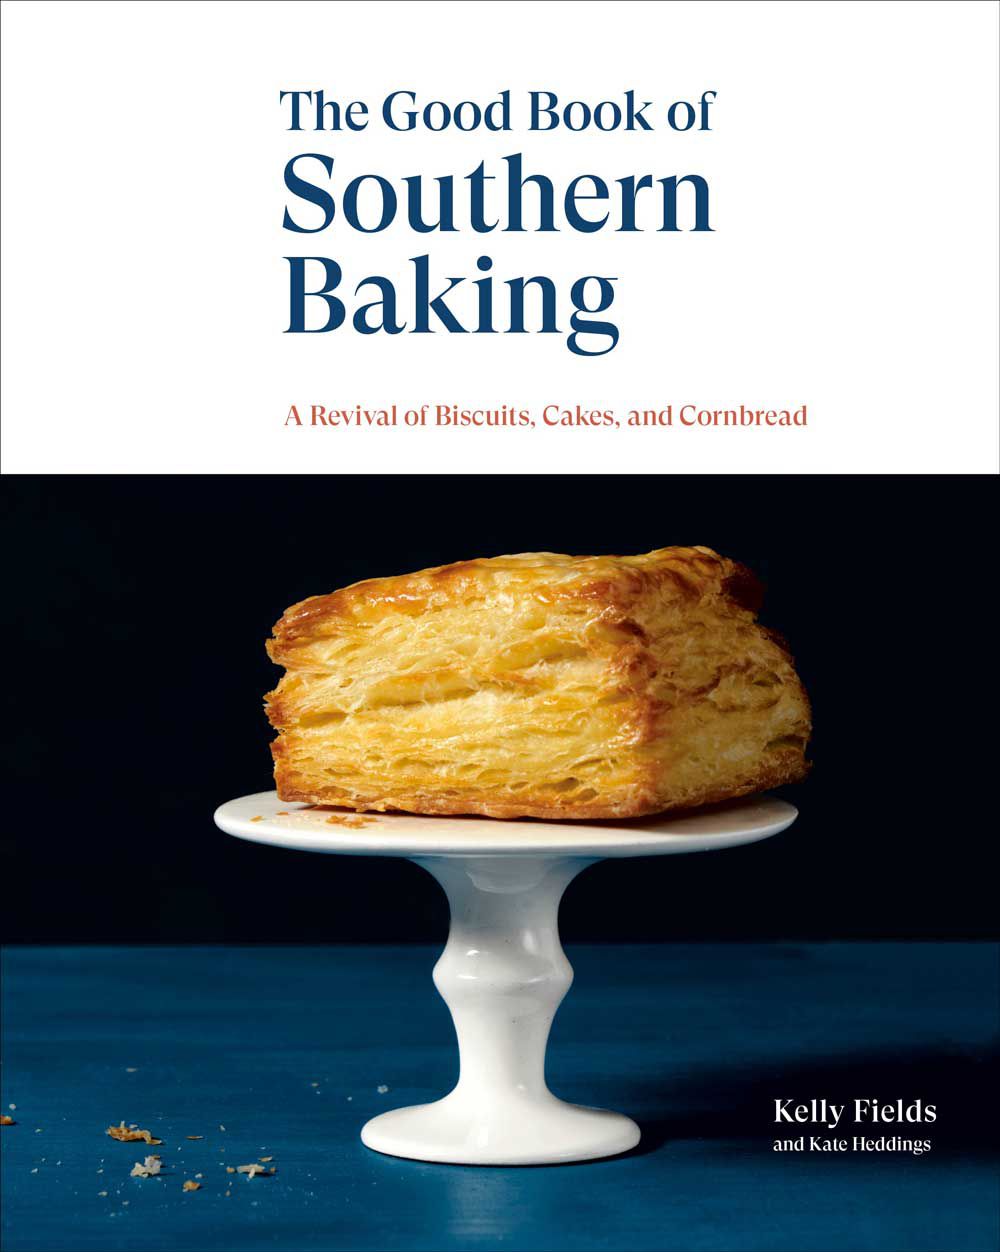 Cover of The Good Book of Southern Baking by Kelly Fields